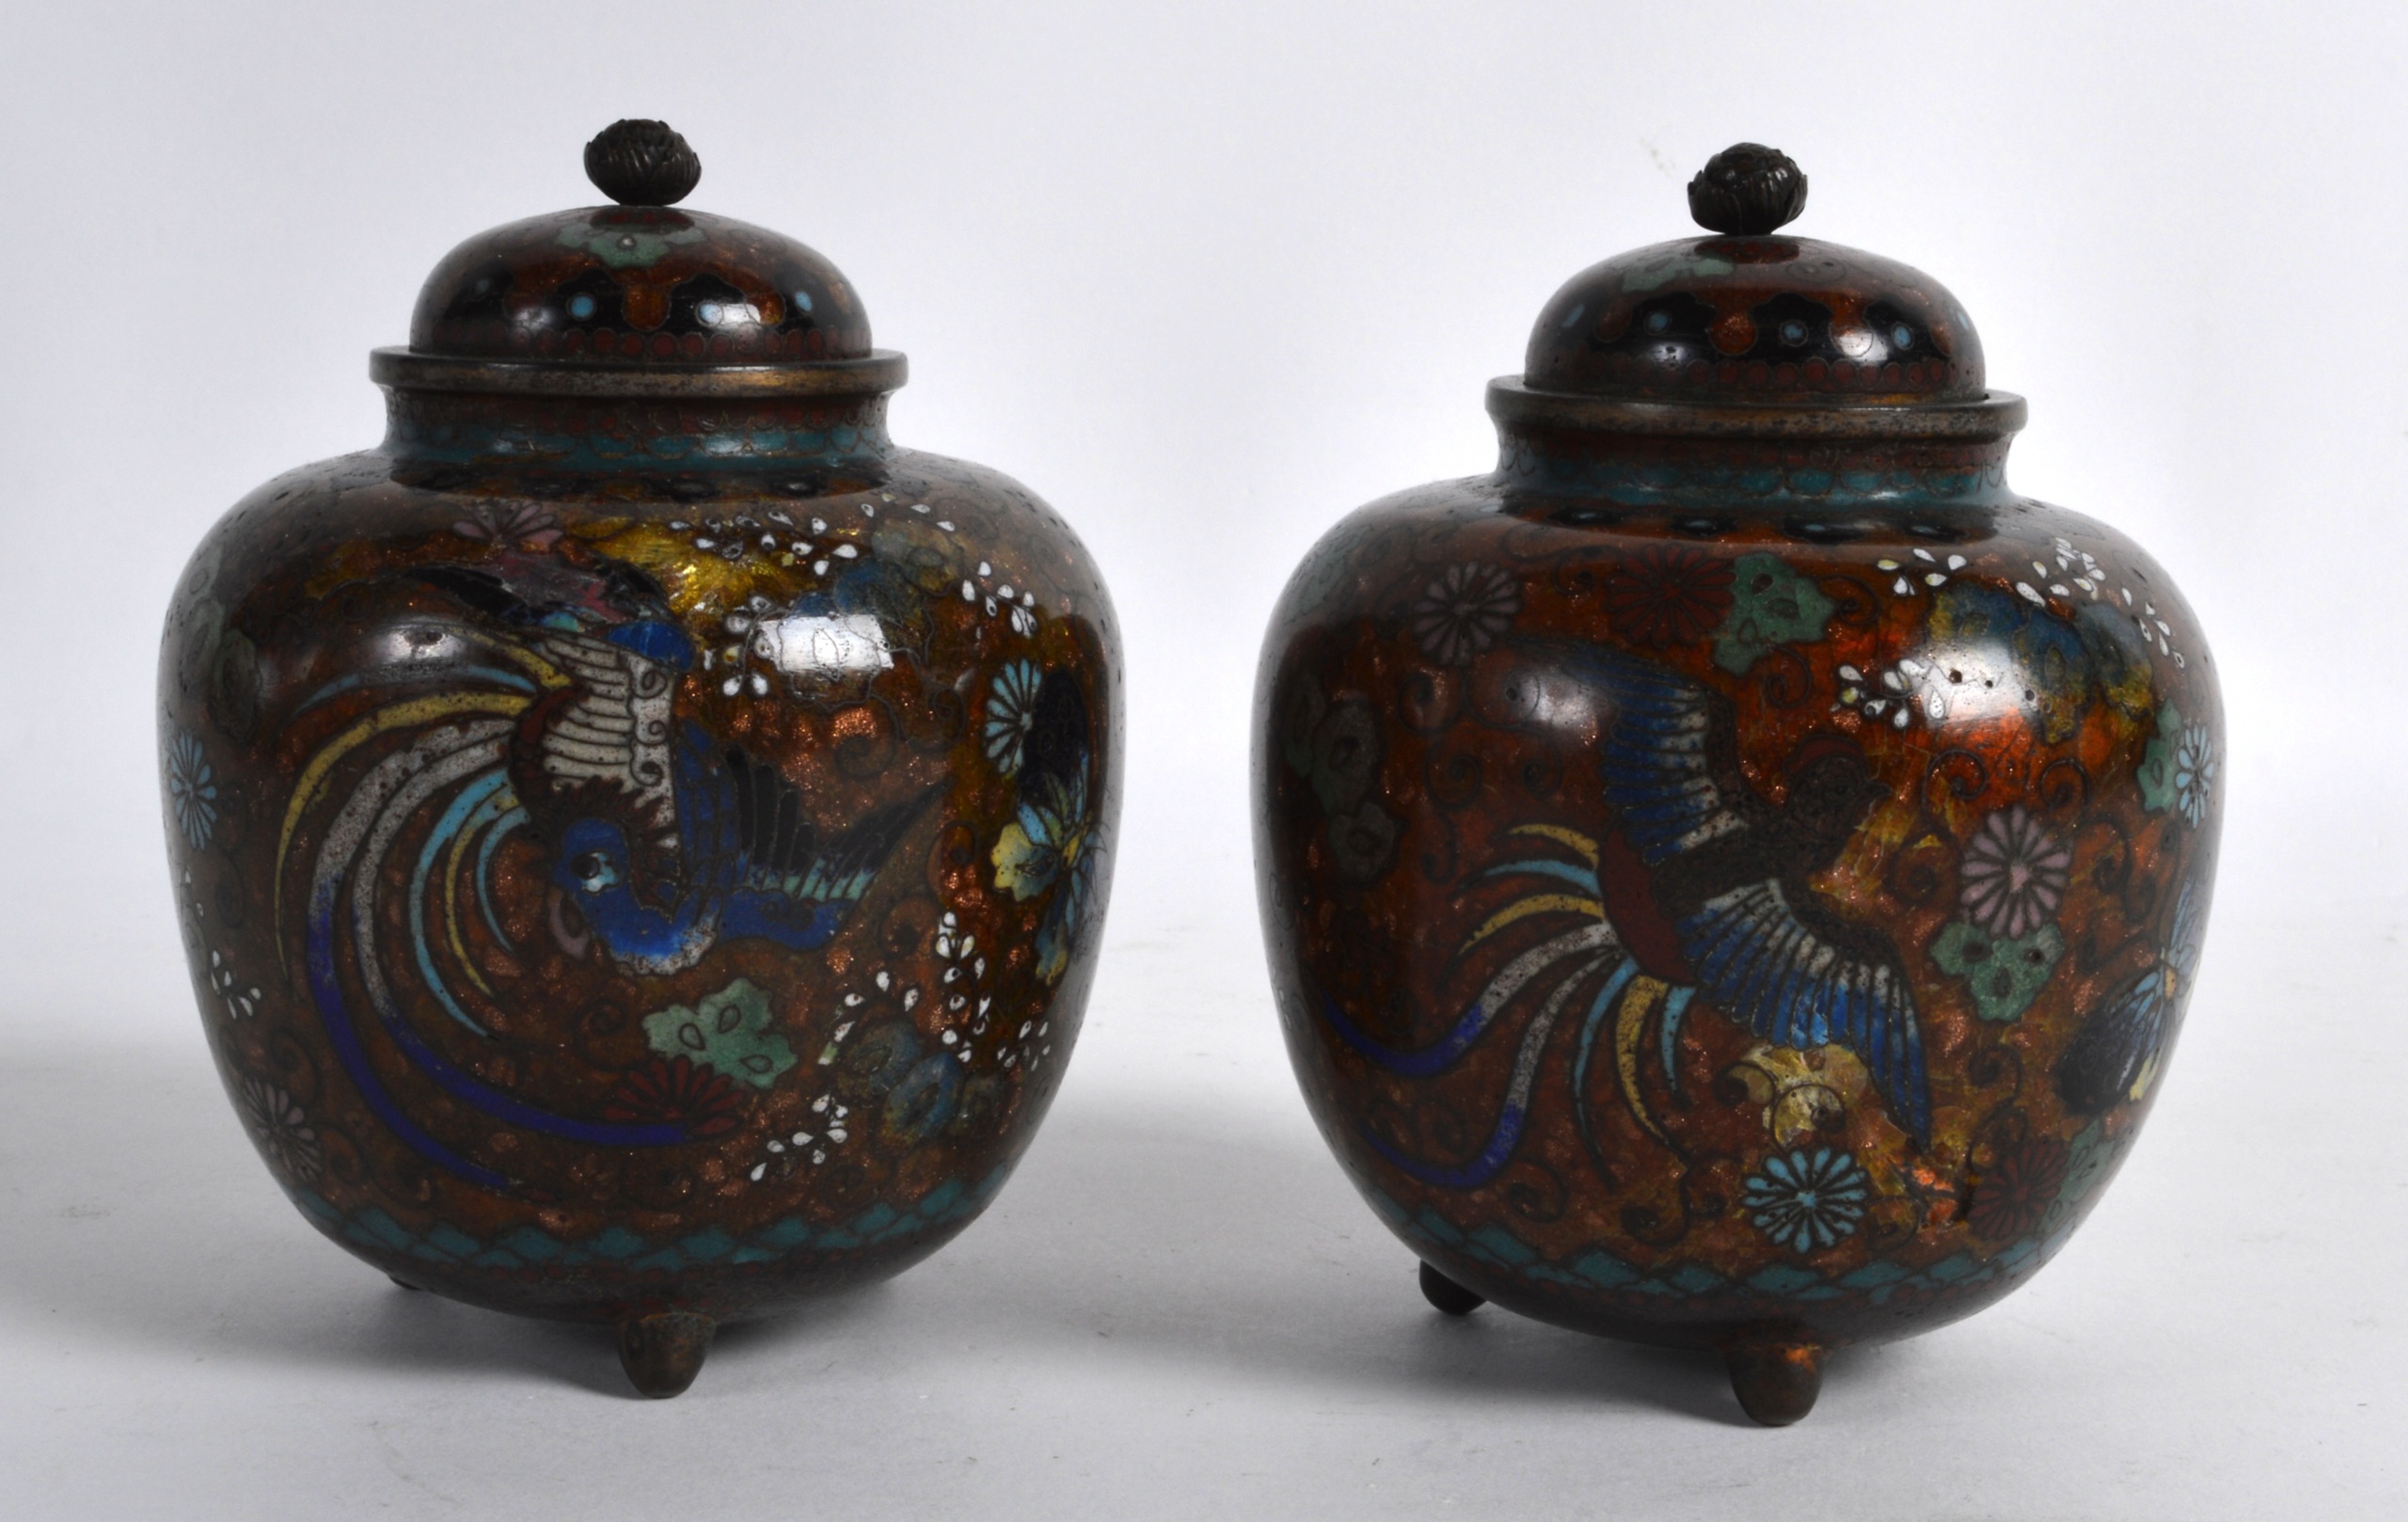 A PAIR OF EARLY 20TH CENTURY JAPANESE MEIJI PERIOD CLOISONNE ENAMEL VASES & COVERS decorated with - Image 2 of 2